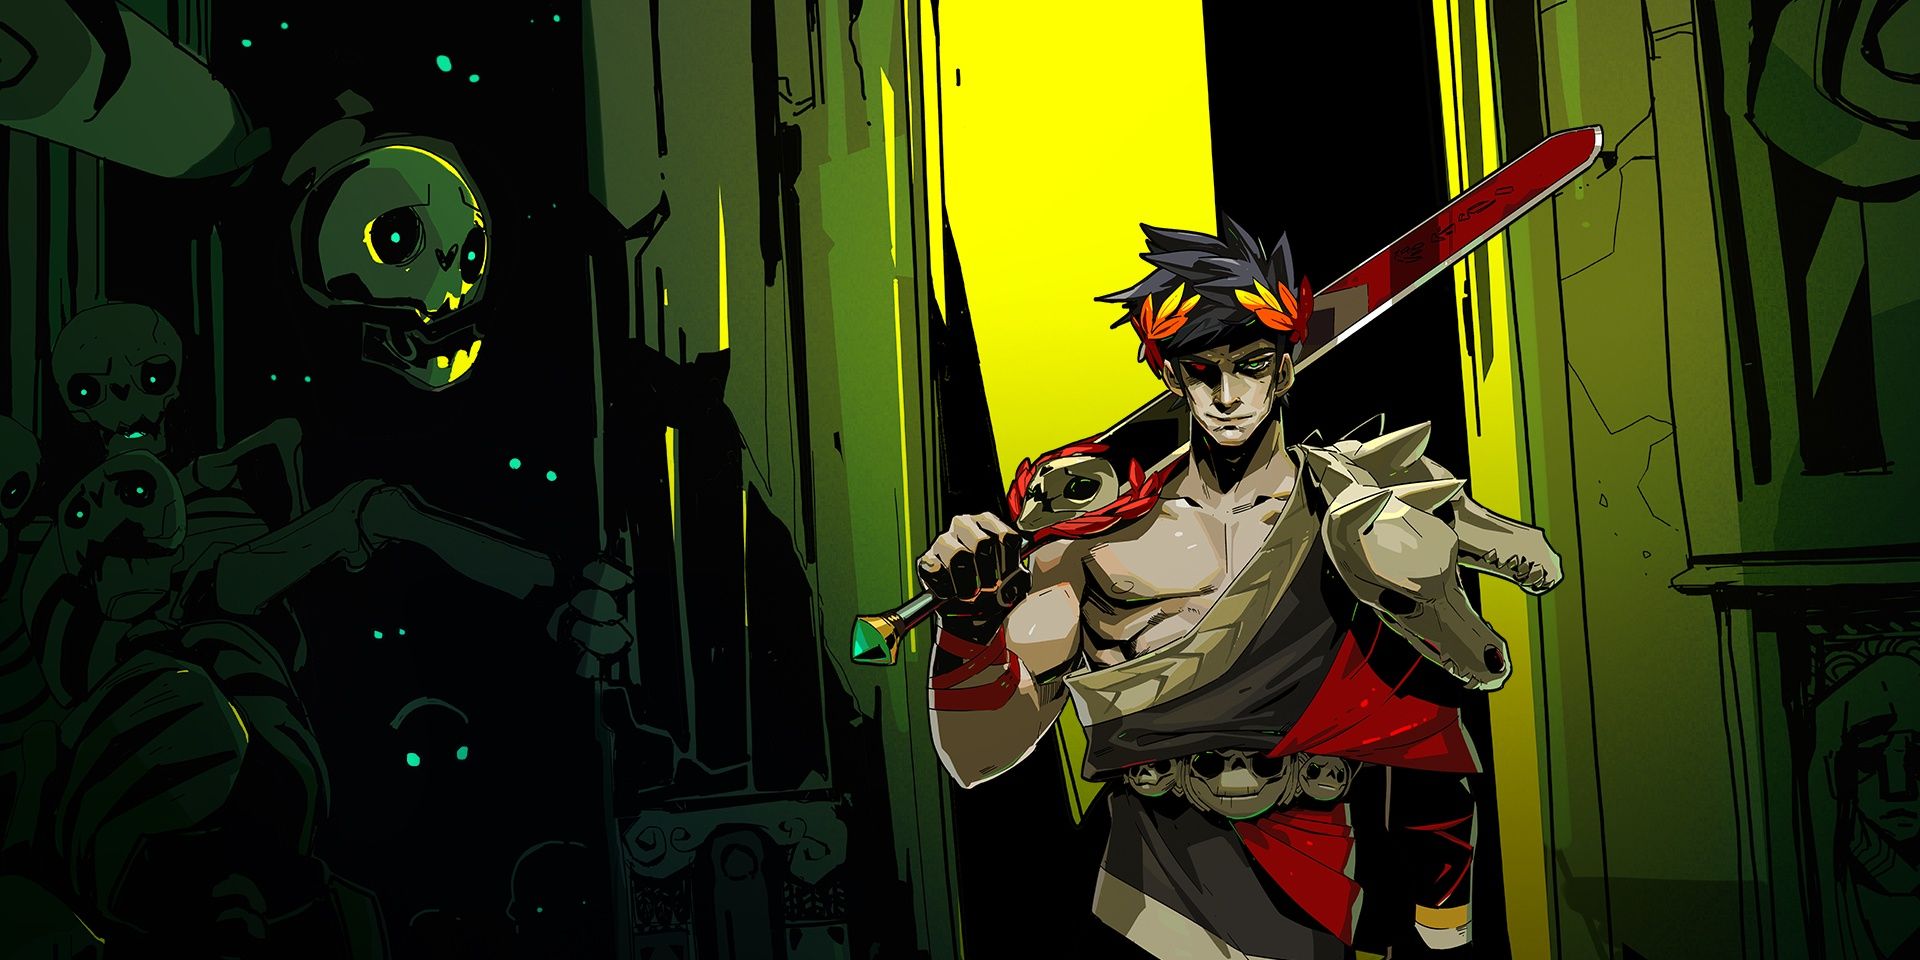 Zagreus from Hades with his sword